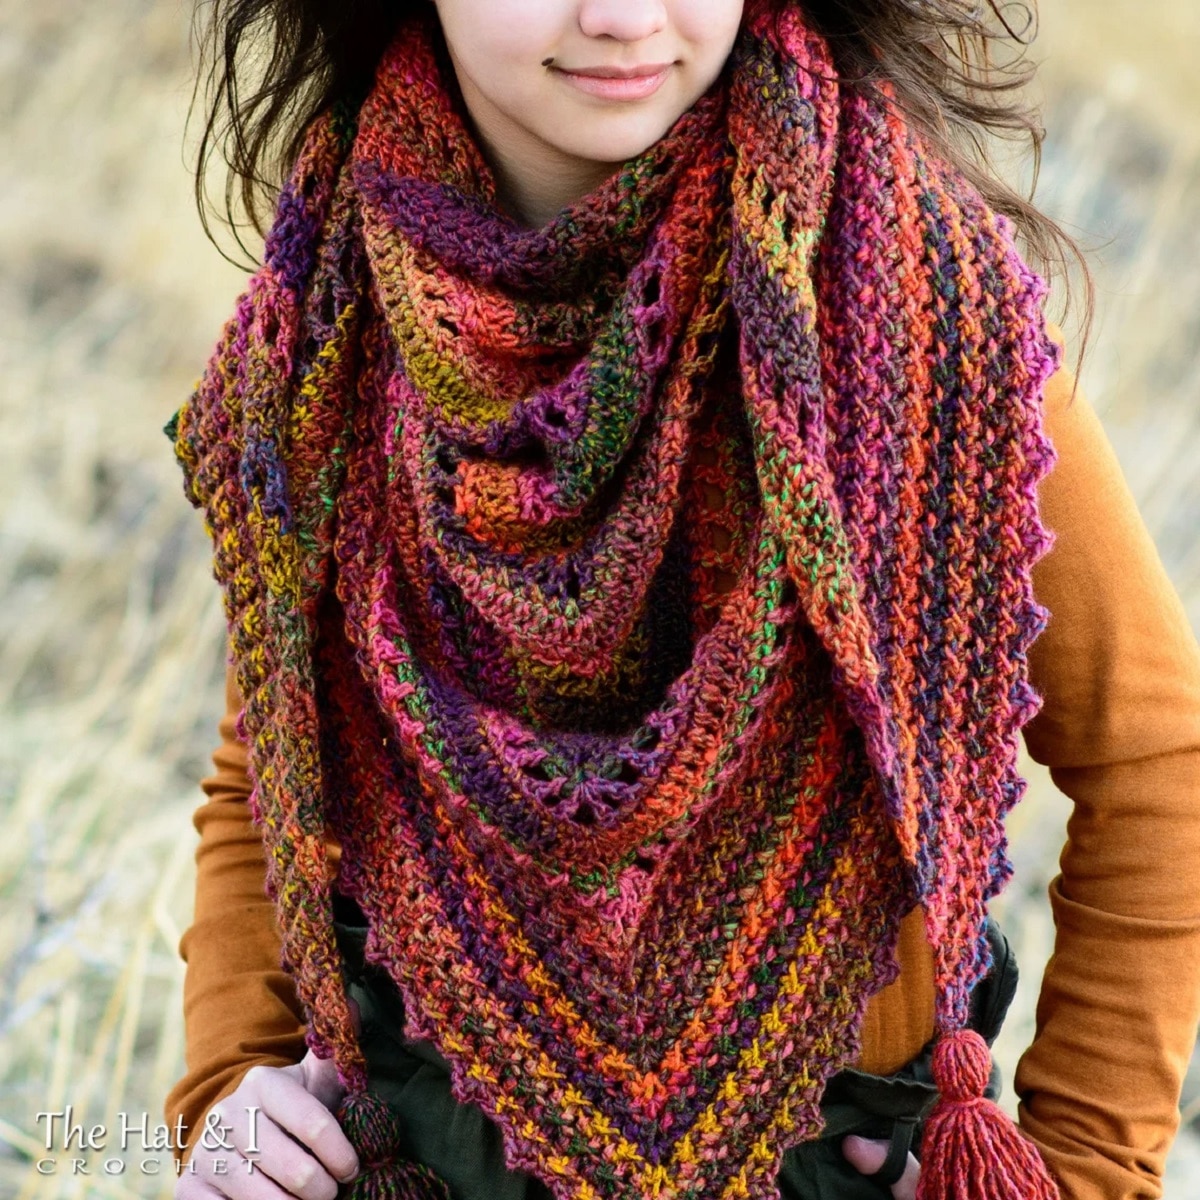 Brunette woman smiling with a pink, purple, green, yellow, and brown striped crochet triangle scarf around her neck.